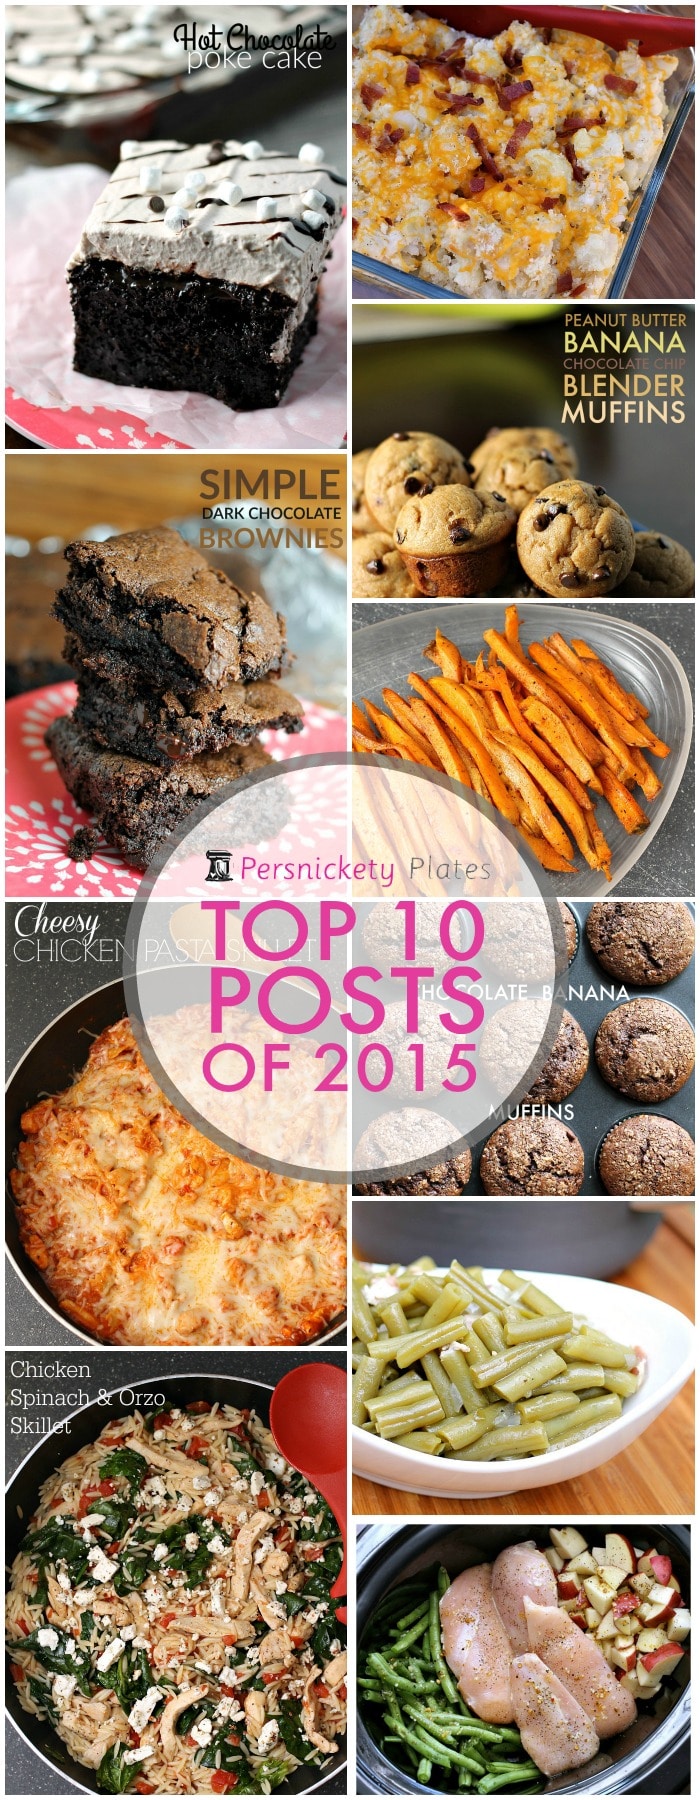 Persnickety Plates Top 10 Most Popular Posts of 2015! 